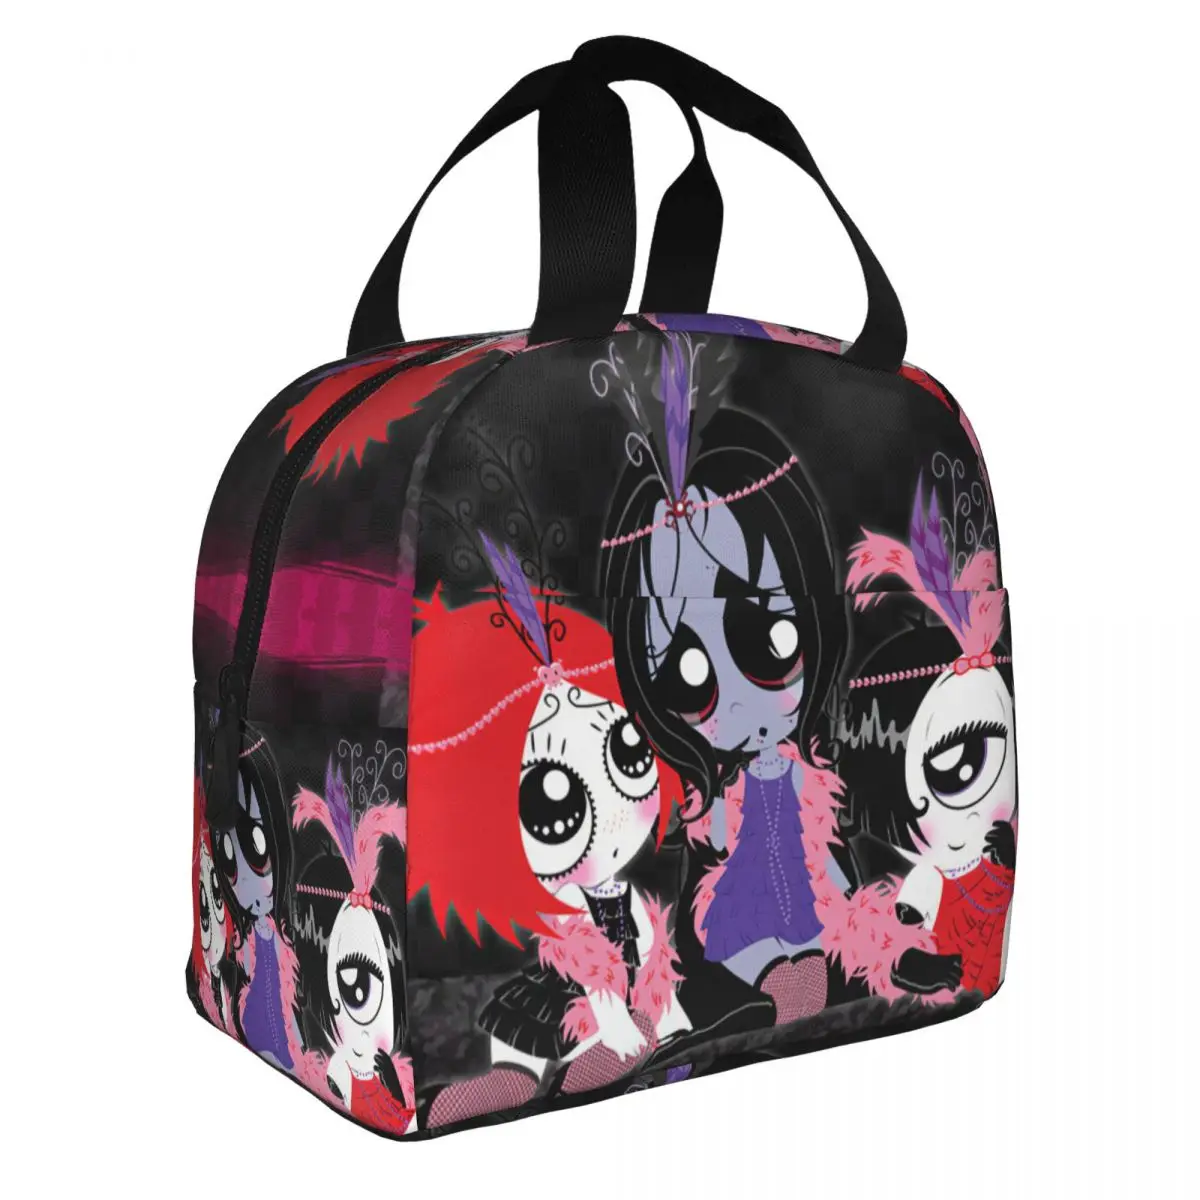 Ruby Gloom Lunch Bento Bags Portable Aluminum Foil thickened Thermal Cloth Lunch Bag for Women Men Boy